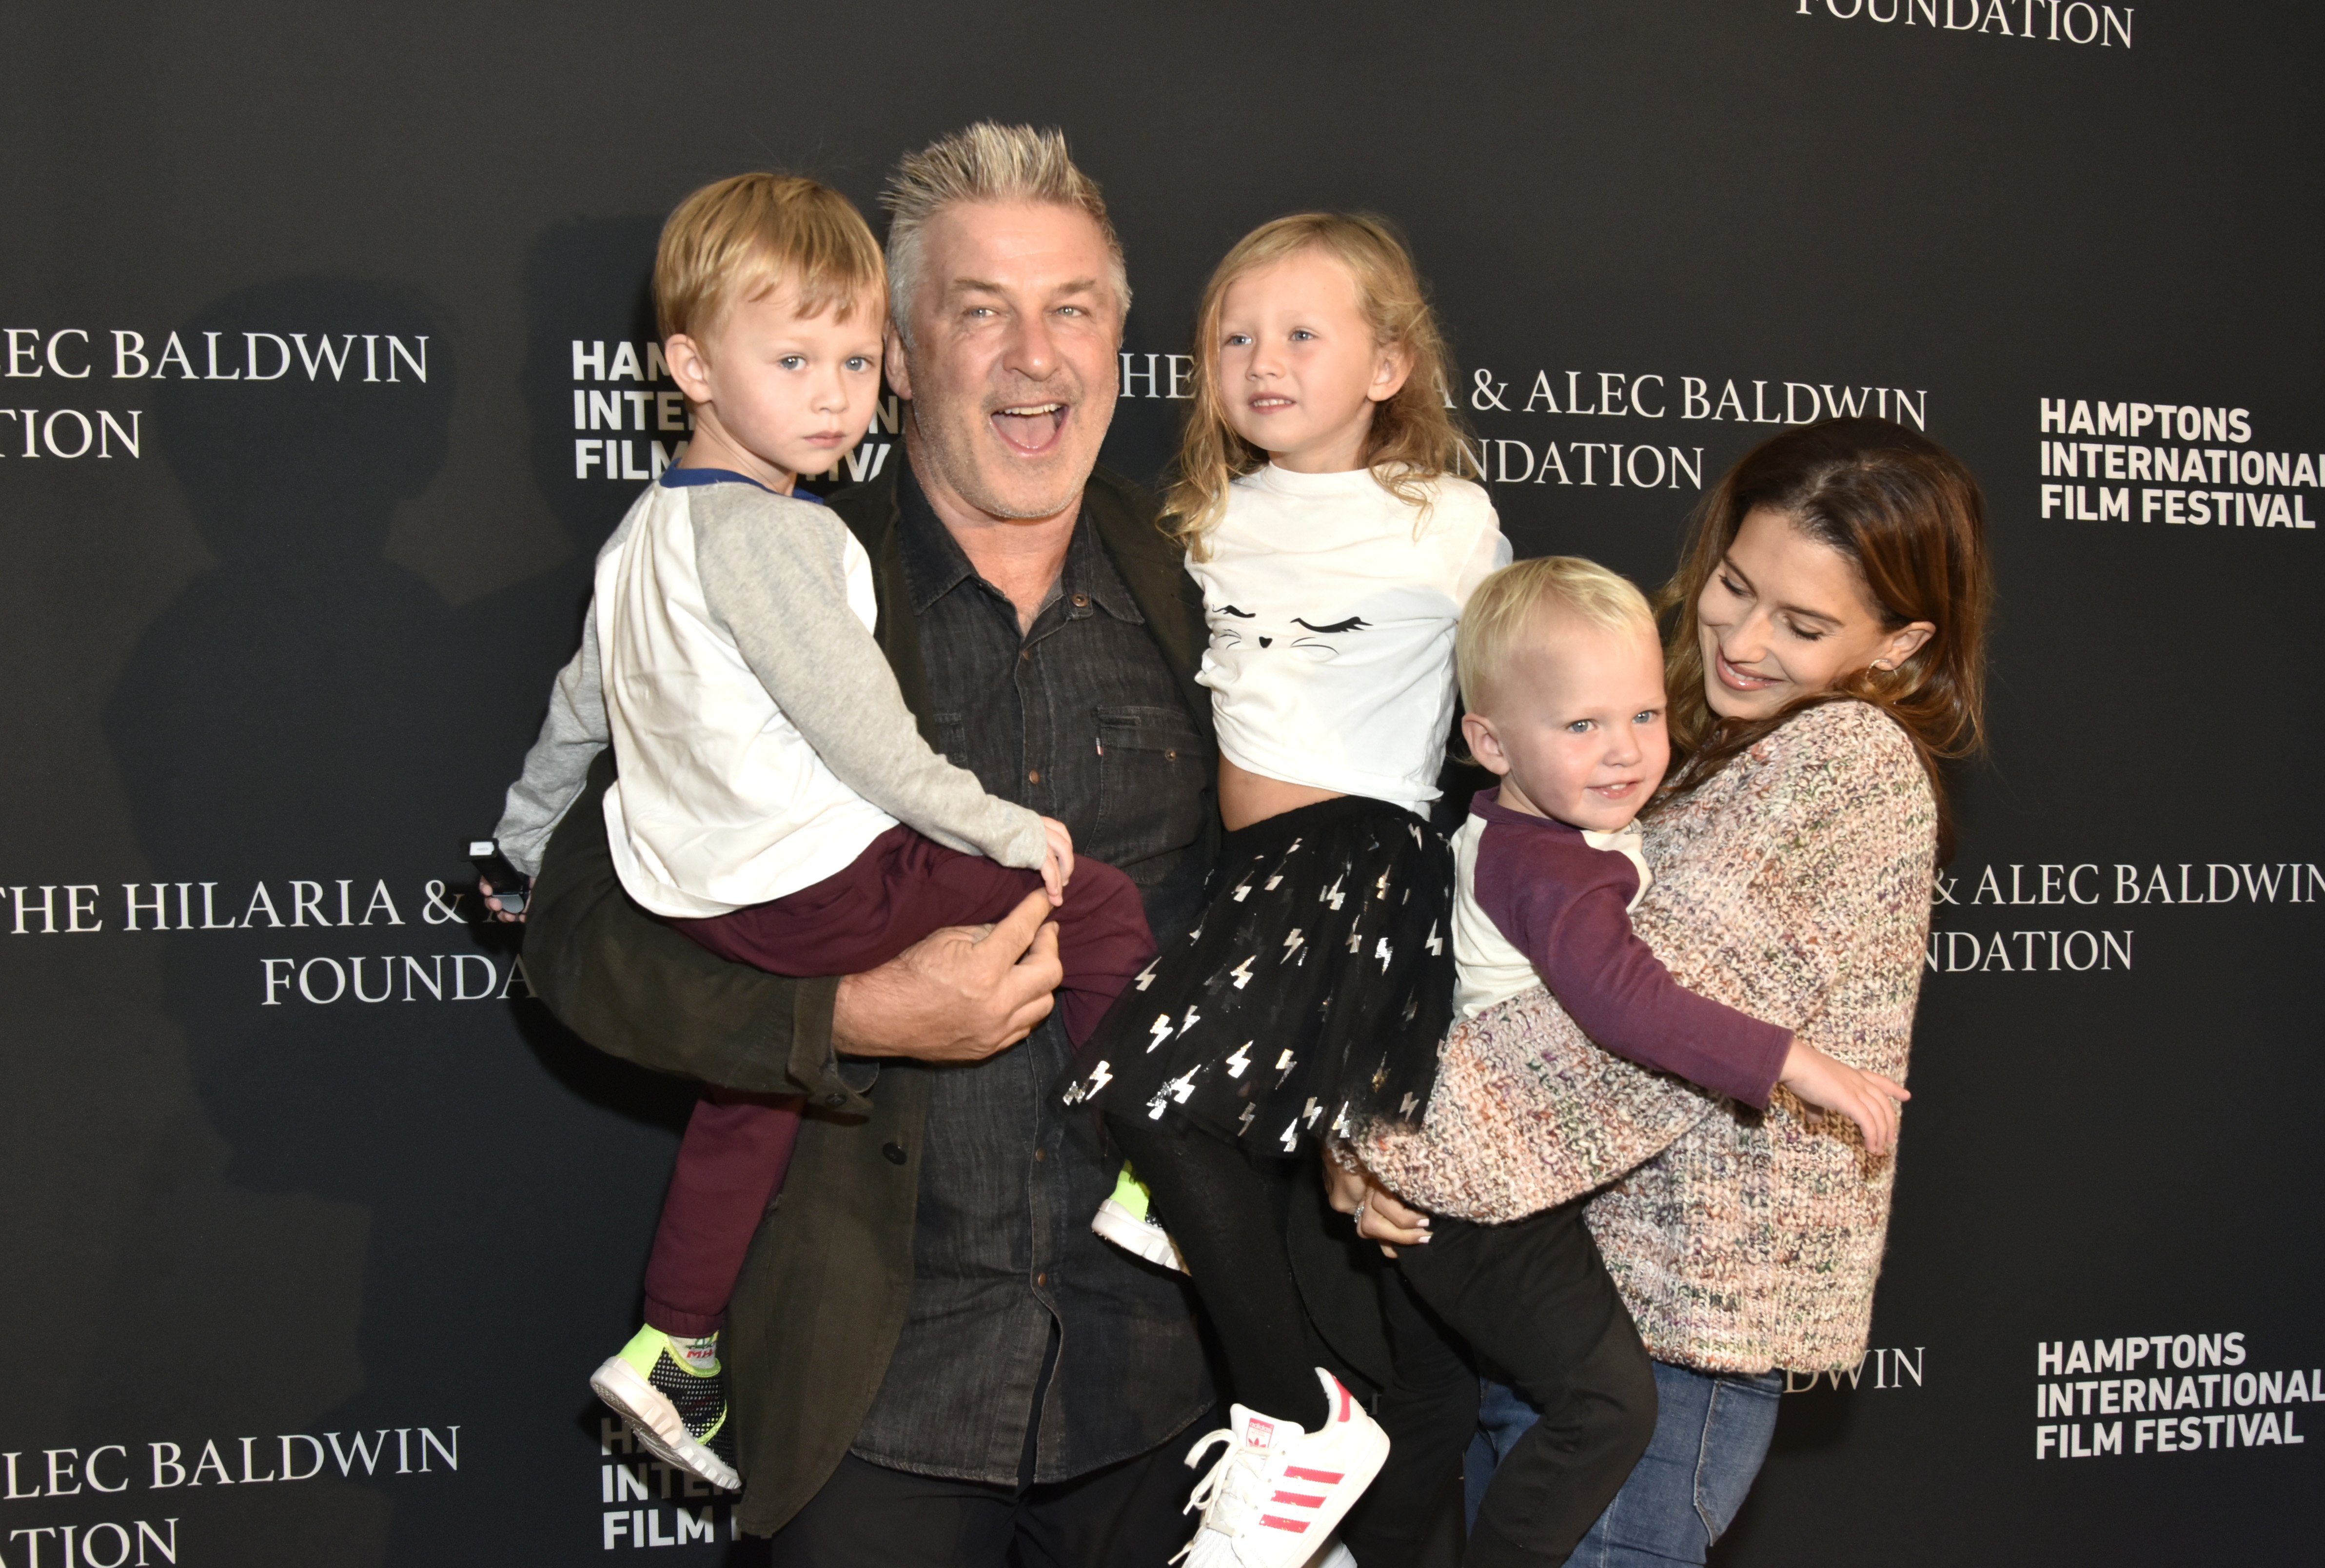 Alec Baldwin and Hilaria Thomas with their children in New York 2018. |  Source: Getty Images 